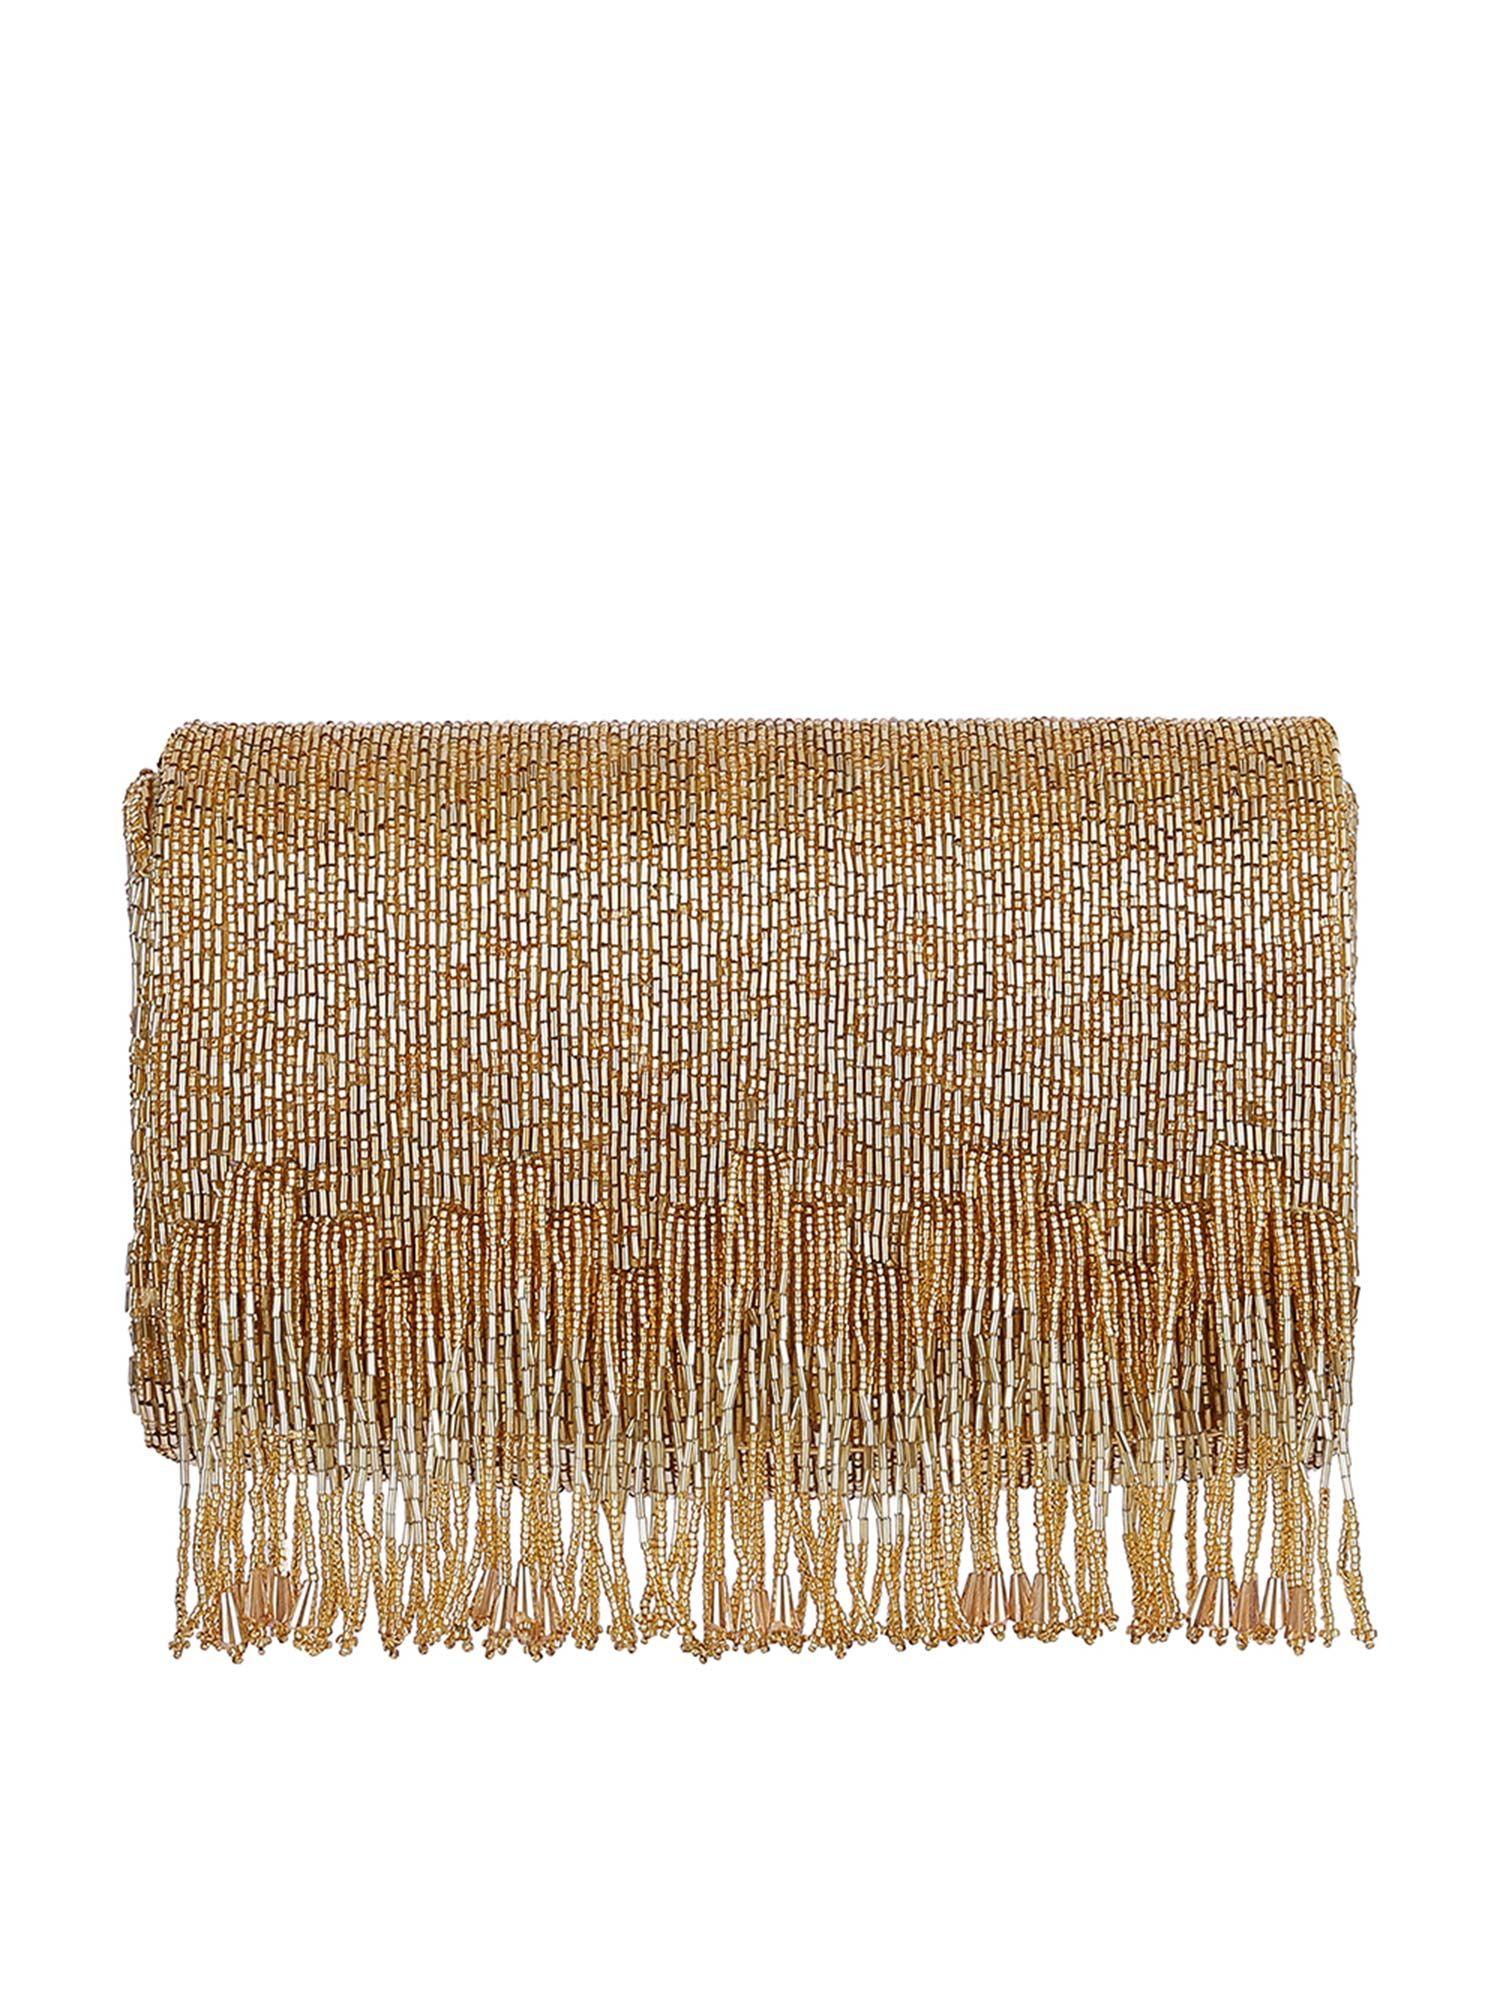 firante flapover clutch peerless gold with handle